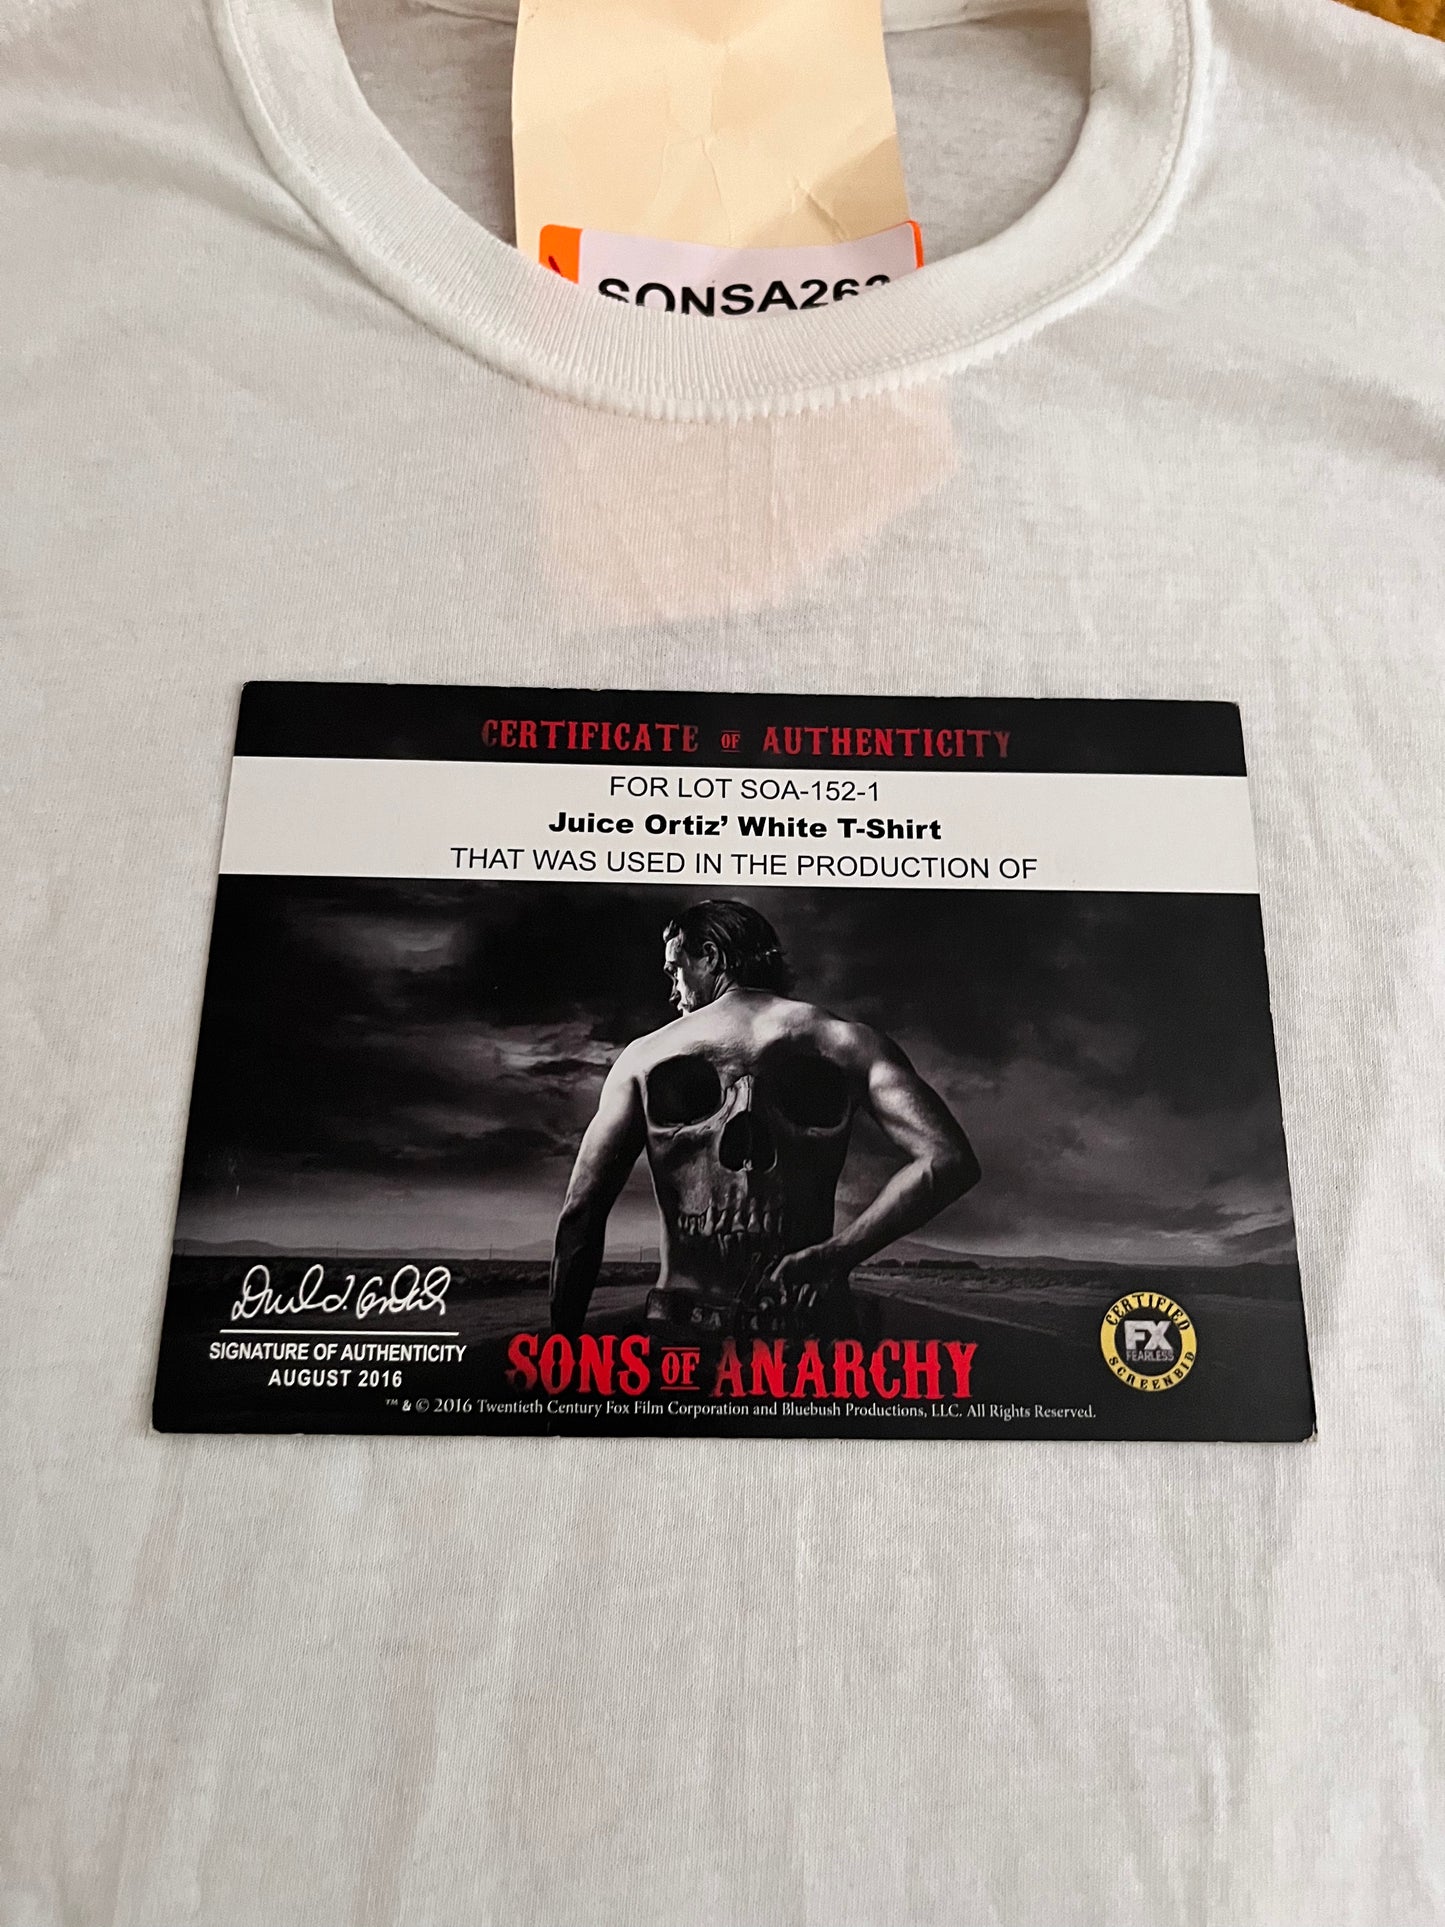 Sons Of Anarchy: Juice Ortiz' White T-Shirt